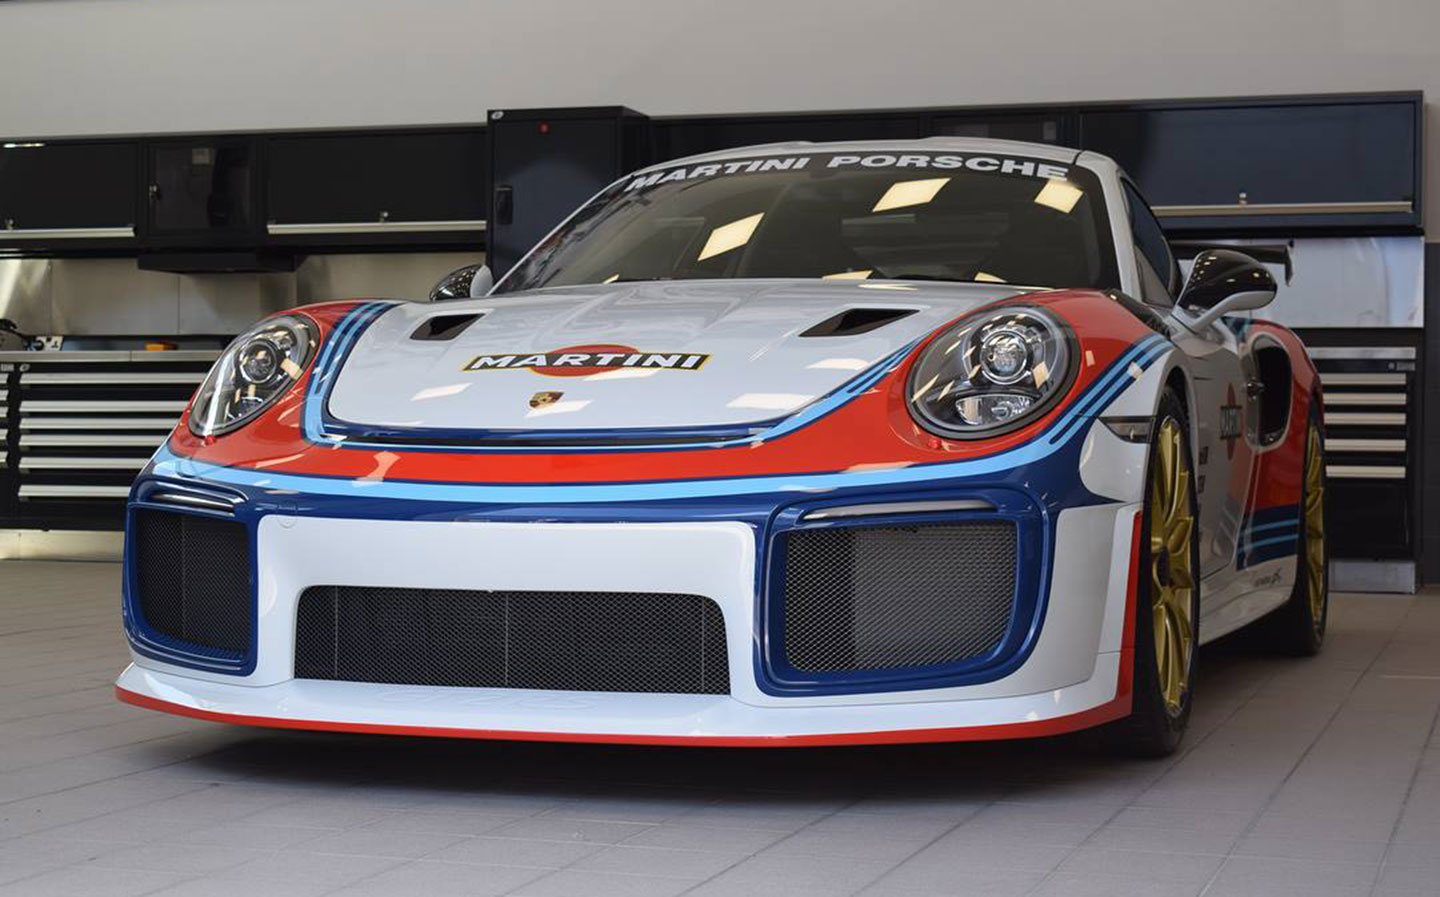 One-off Porsche 911 GT2 RS pays homage to mighty 'Moby Dick' racing car